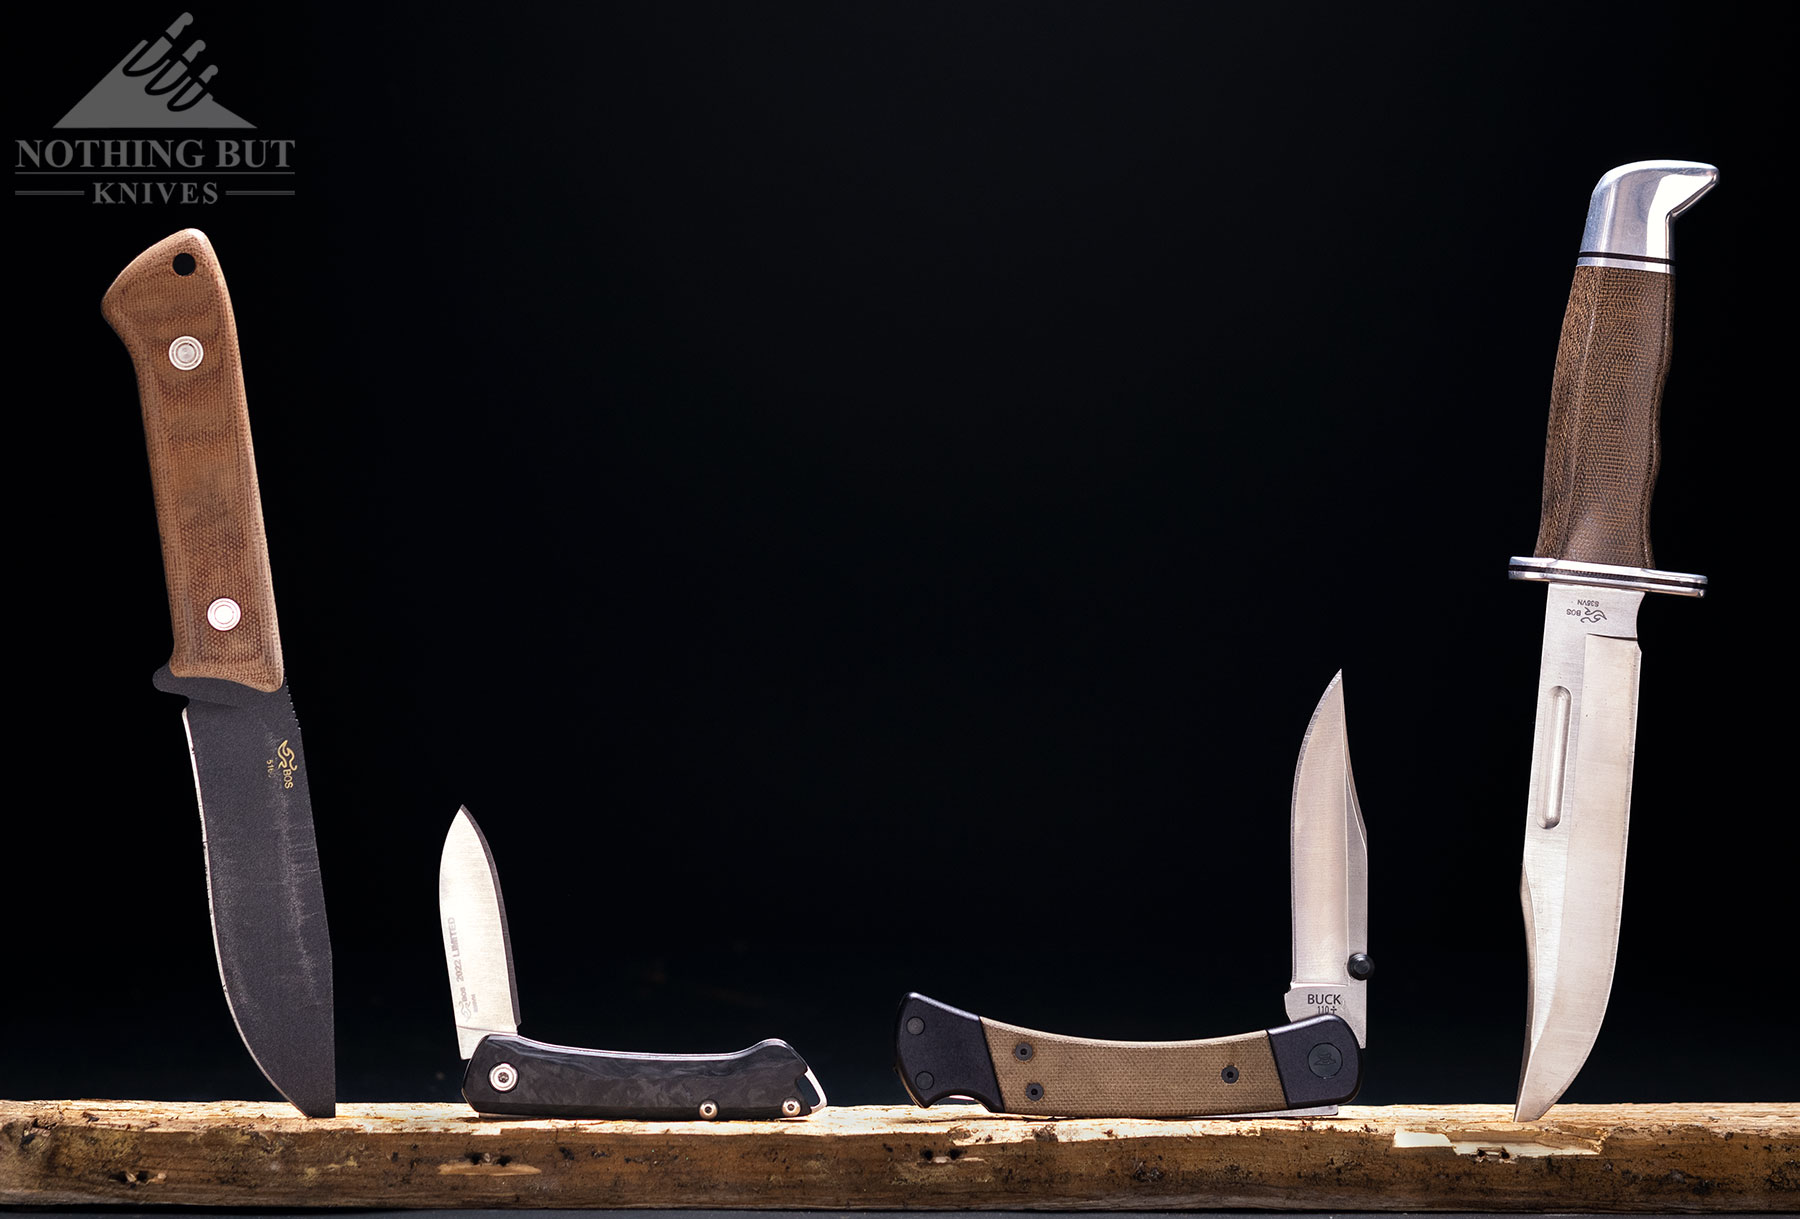 The Campadre, Saunter, 110 Hunter Sport and 119 Special Pro pictured here are all Buck knives made in Post Falls, Idaho. 